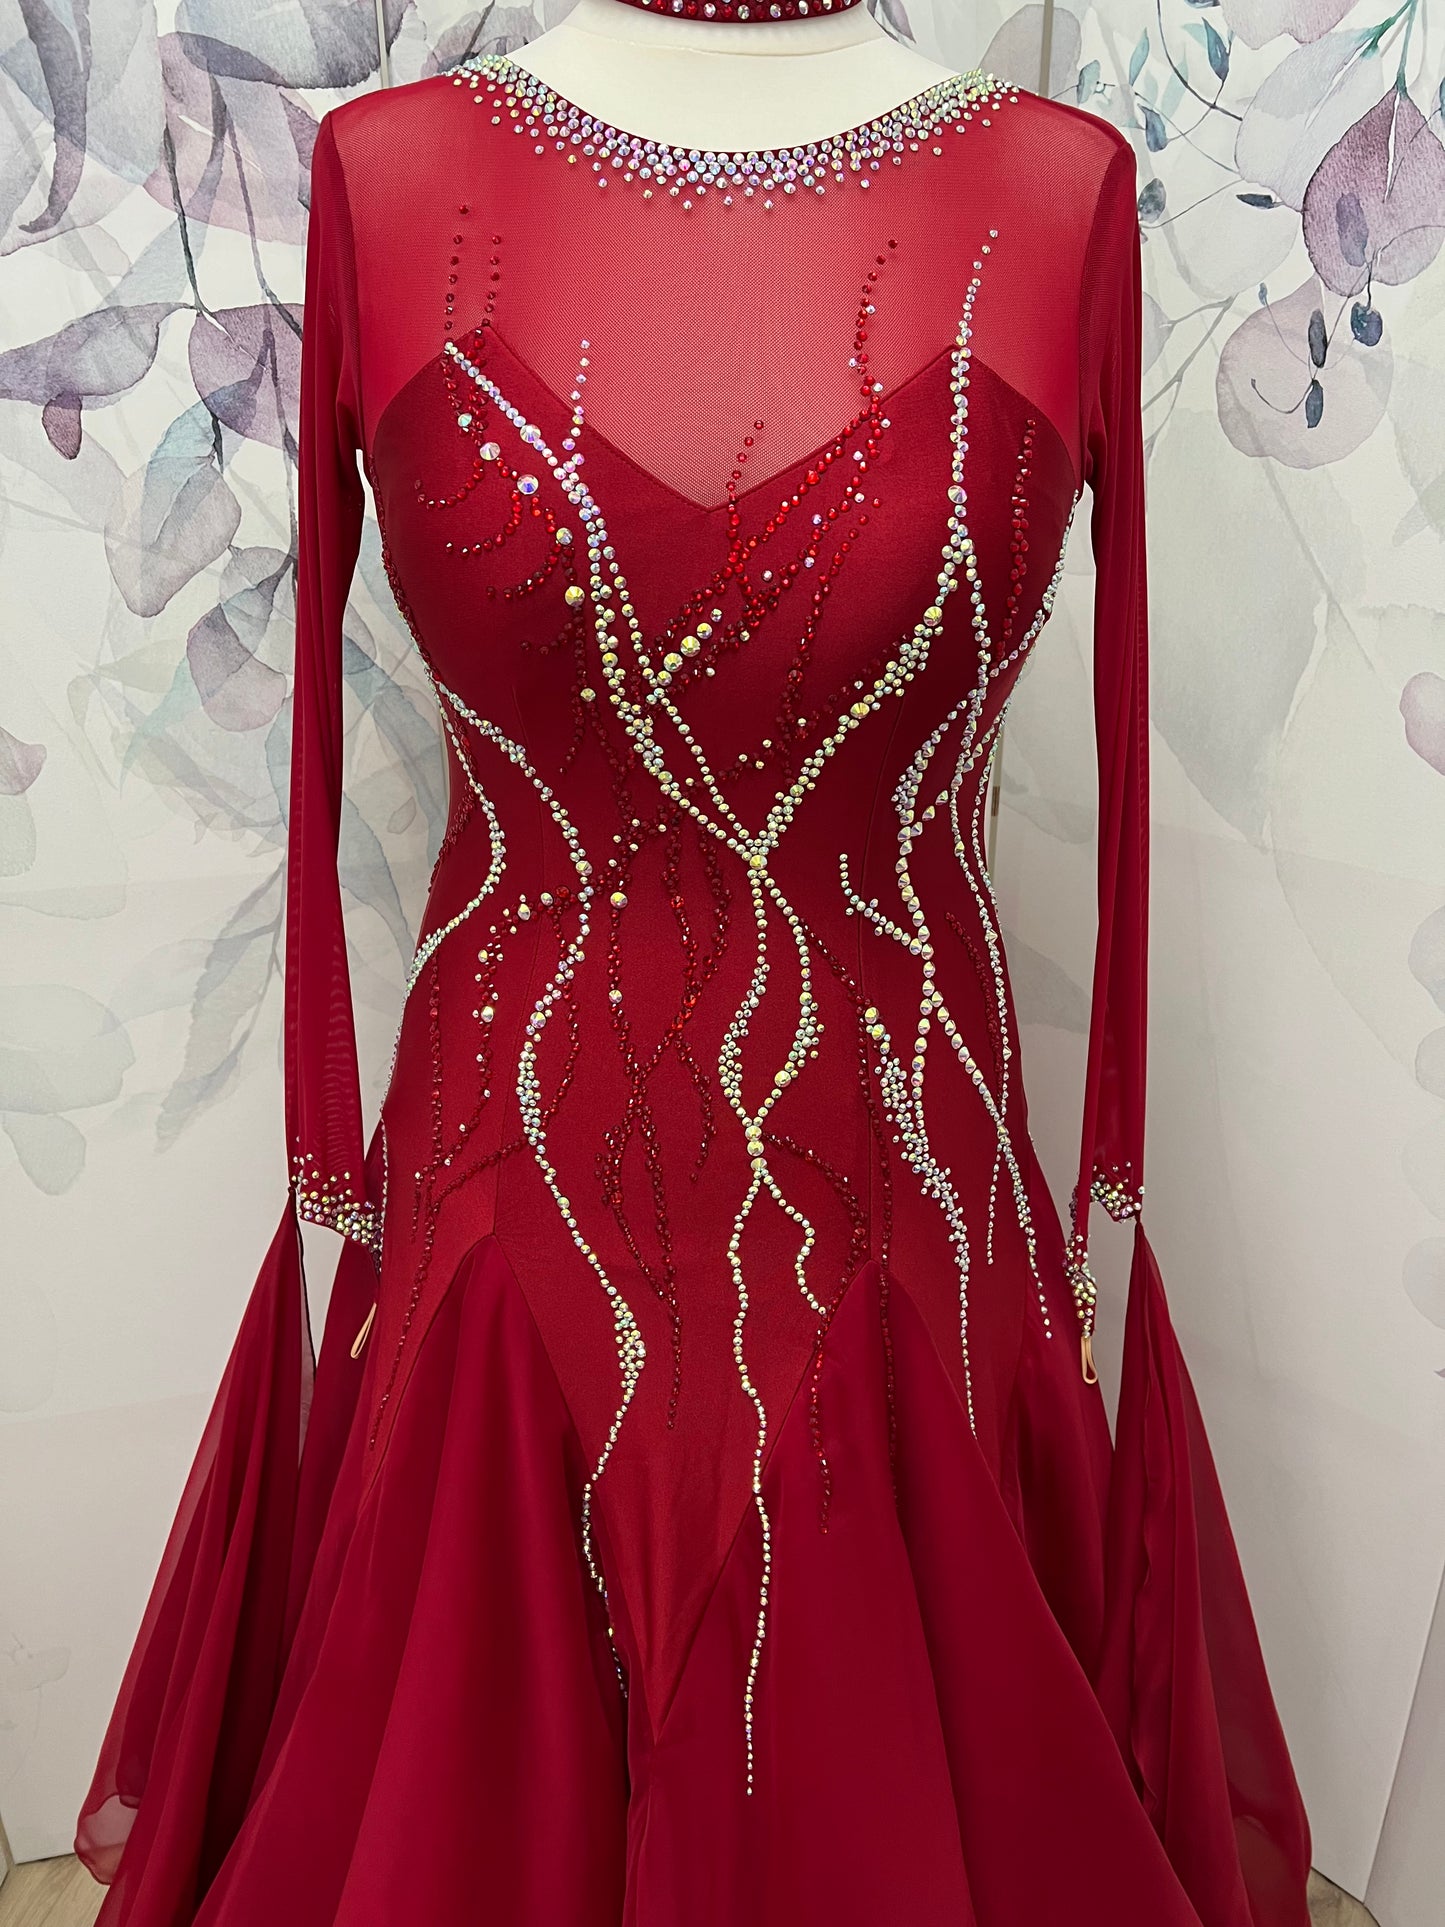 002 Red Competition Ballroom Dress. Detachable floats & back high enough to wear own bra. Stoned in Siam & AB